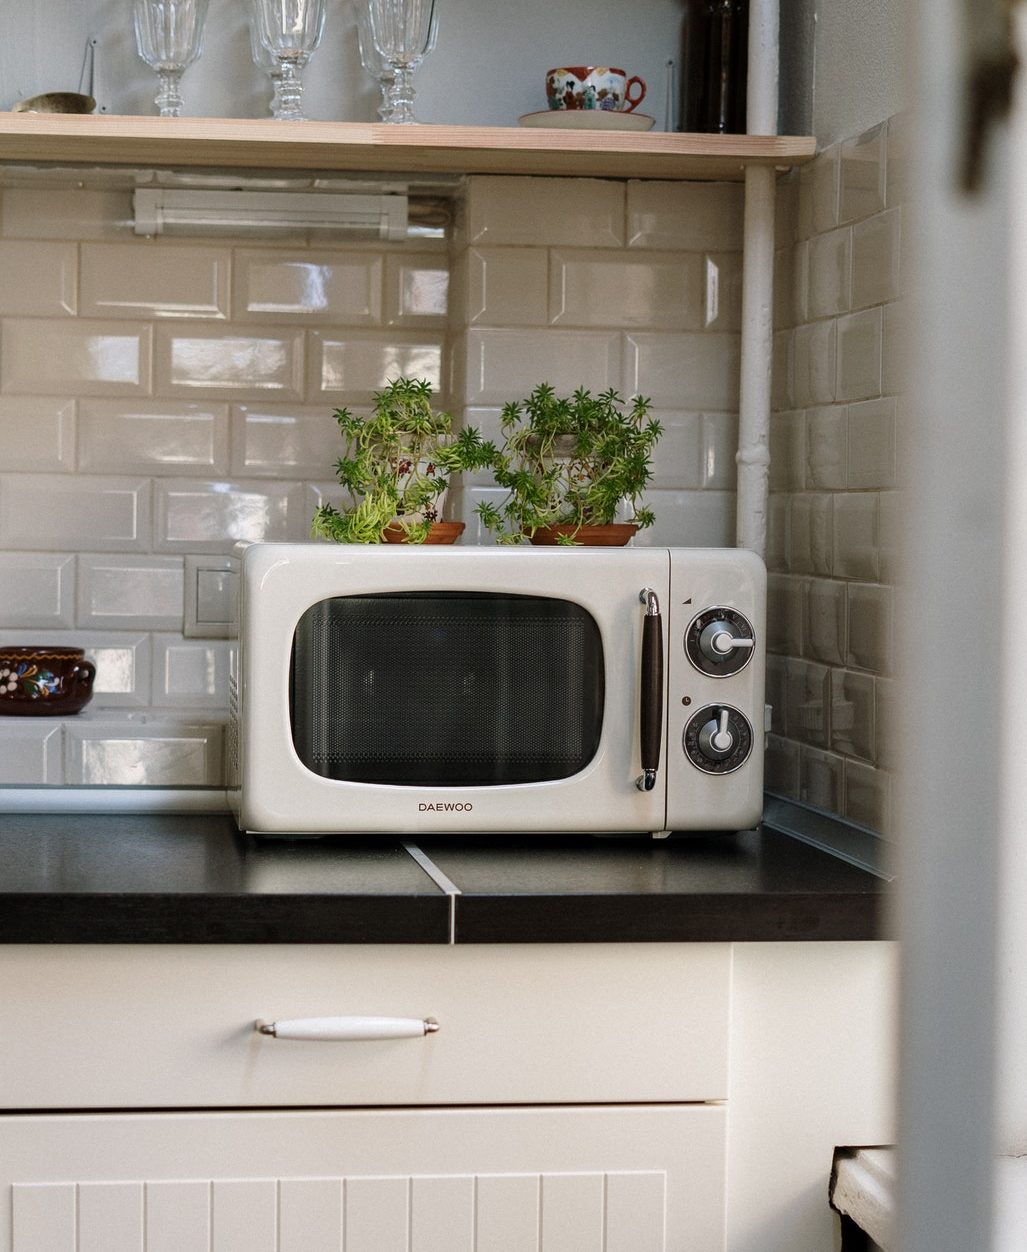 A microwave with some plants on top